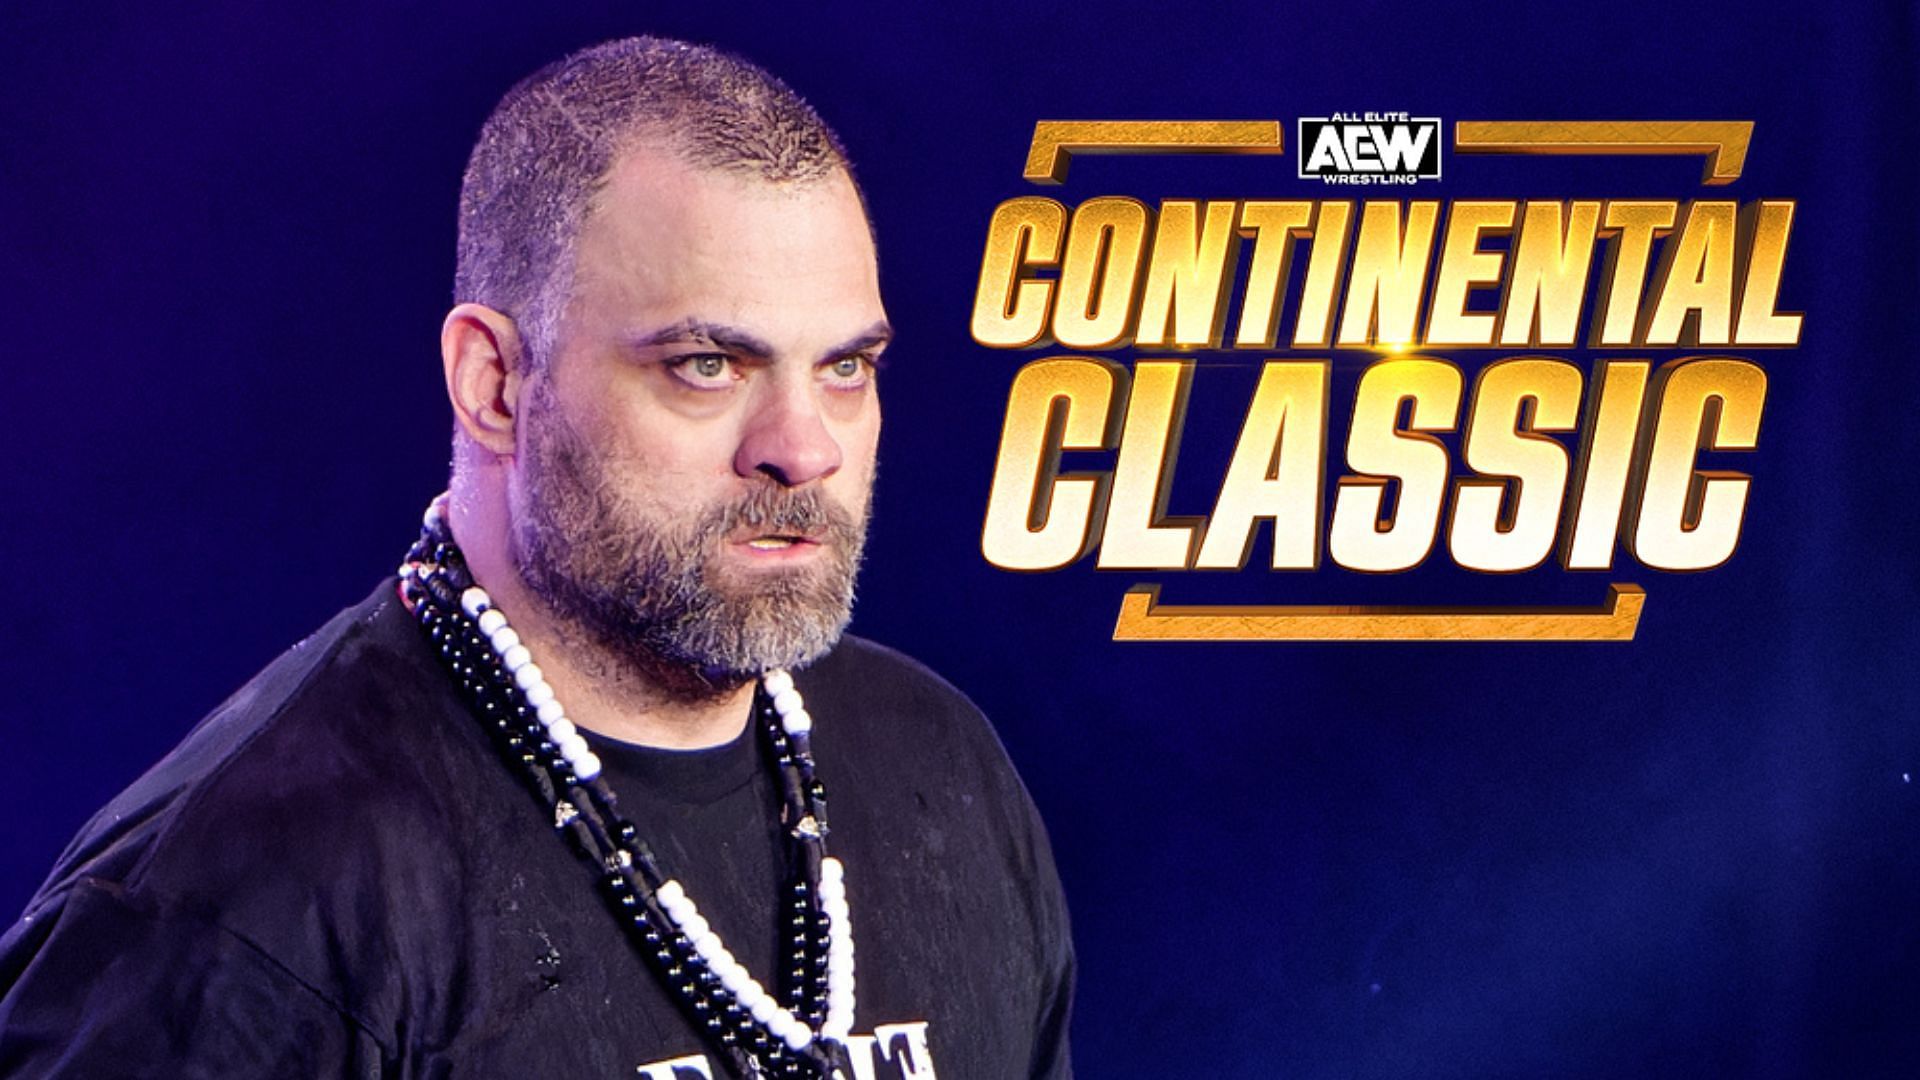 Which AEW stars did Eddie Kingston not want to face in the Continental Classic?